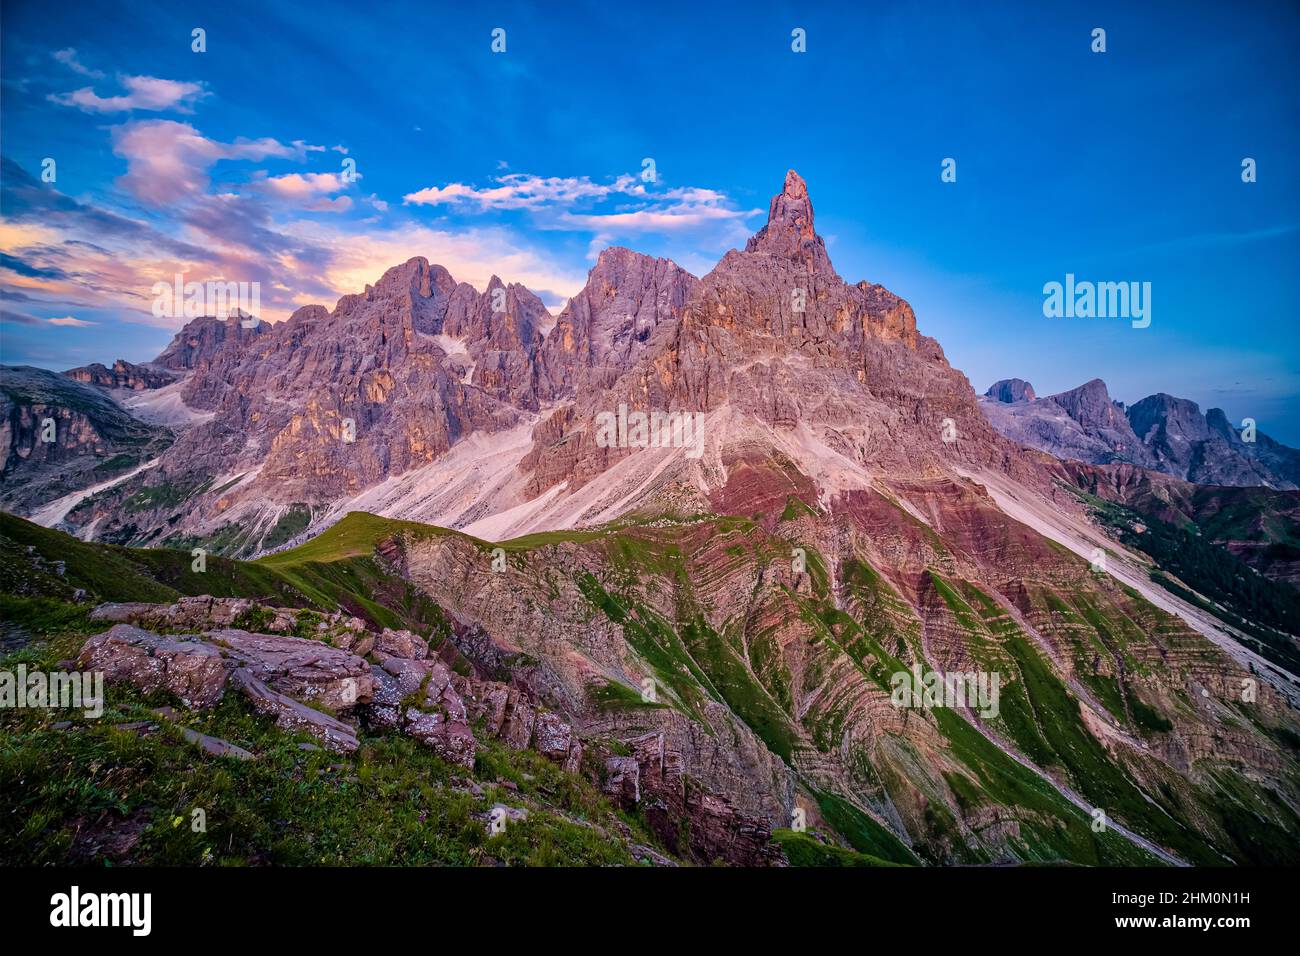 Summits and rock faces of the Pala group, Cimon della Pala, one of the main summits, standing out, seen from above Rolle Pass at sunset. Stock Photo